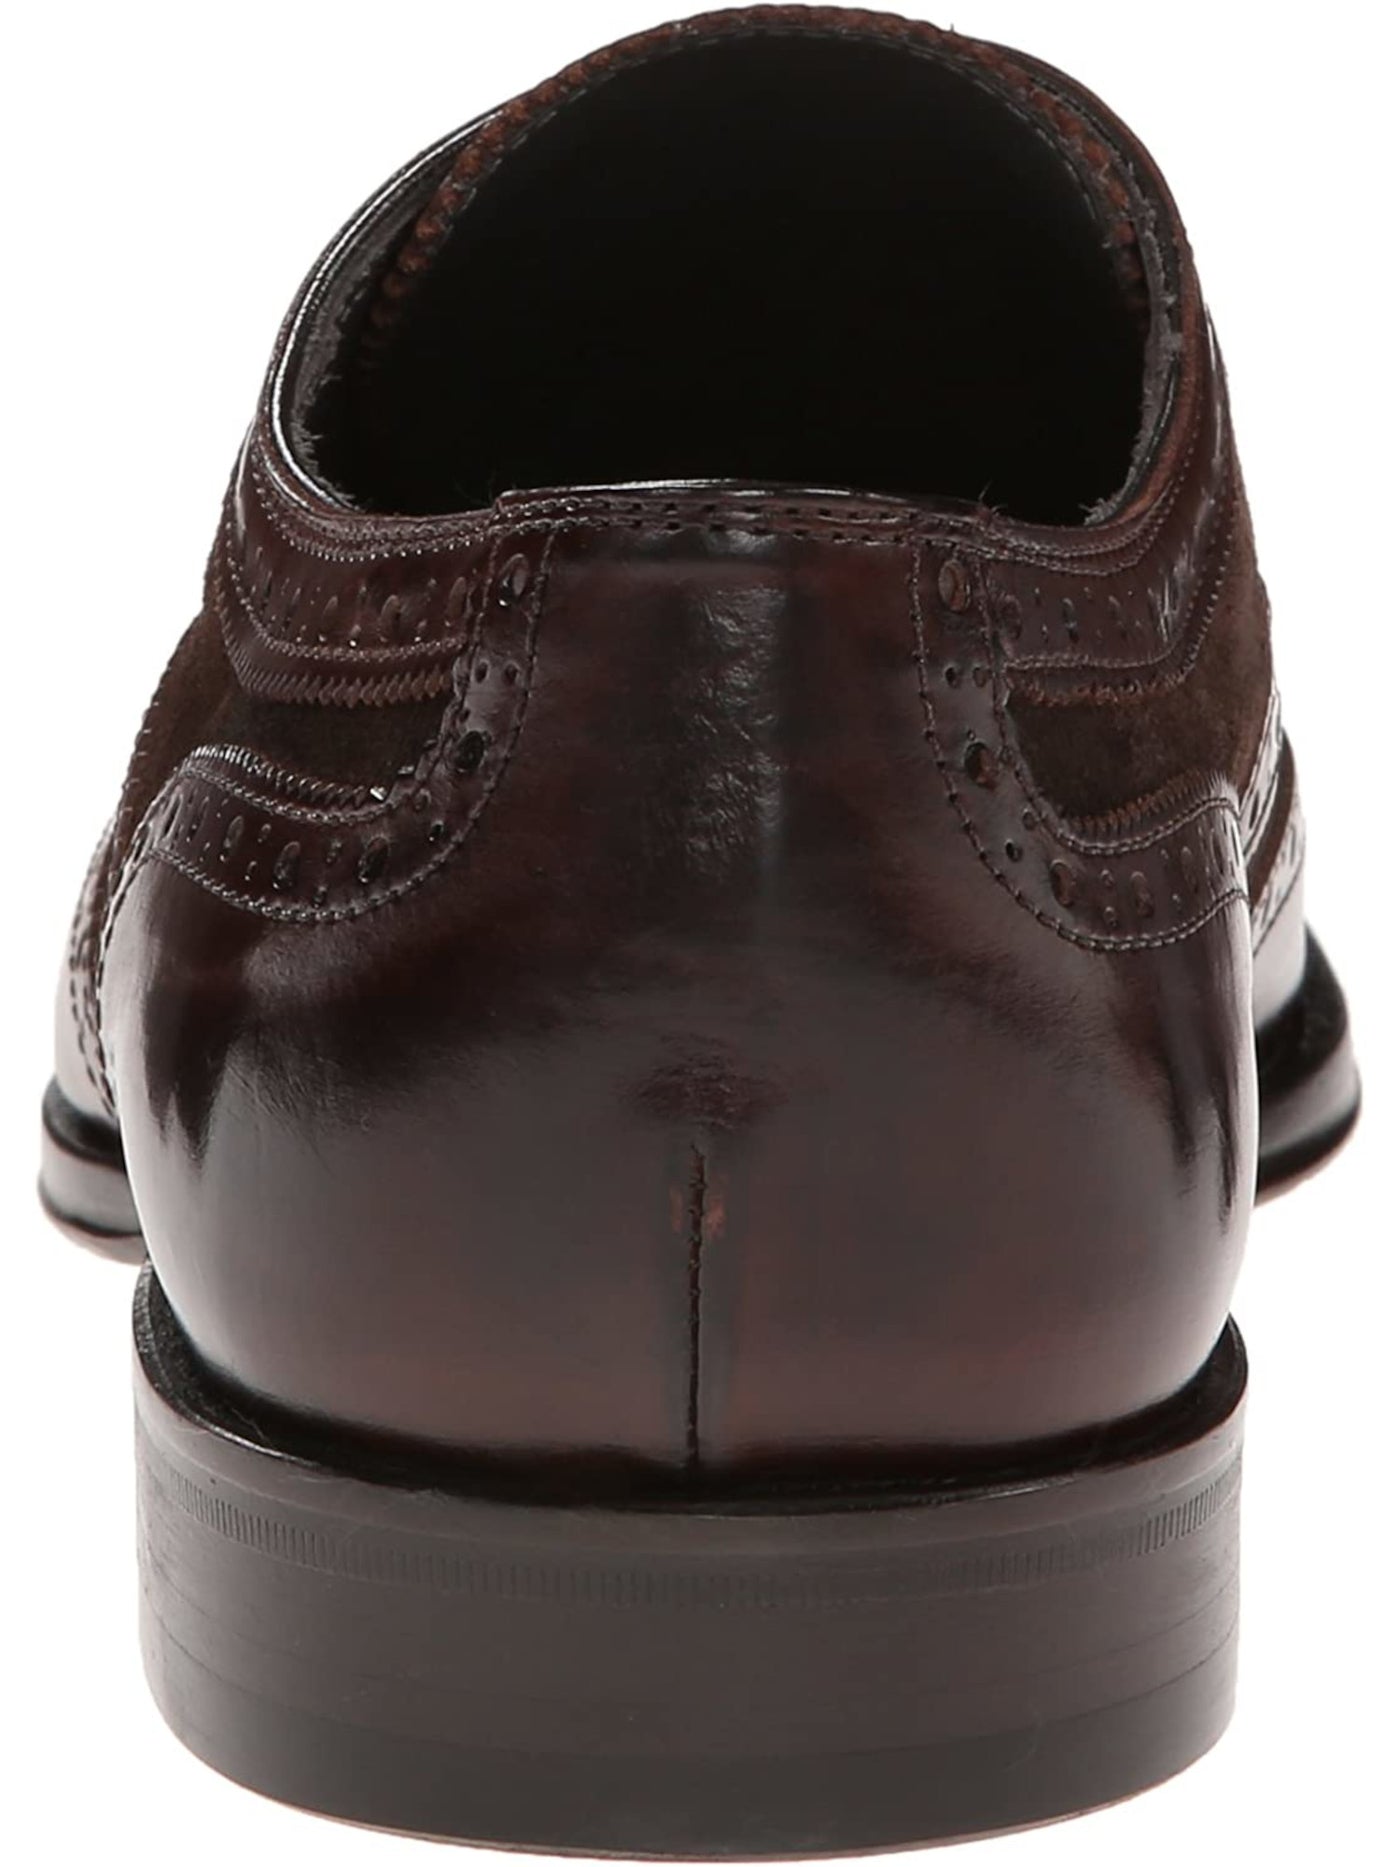 TO BOOT NEW YORK Mens Maroon Perforated Burton Wingtip Toe Block Heel Lace-Up Leather Oxford Shoes 10